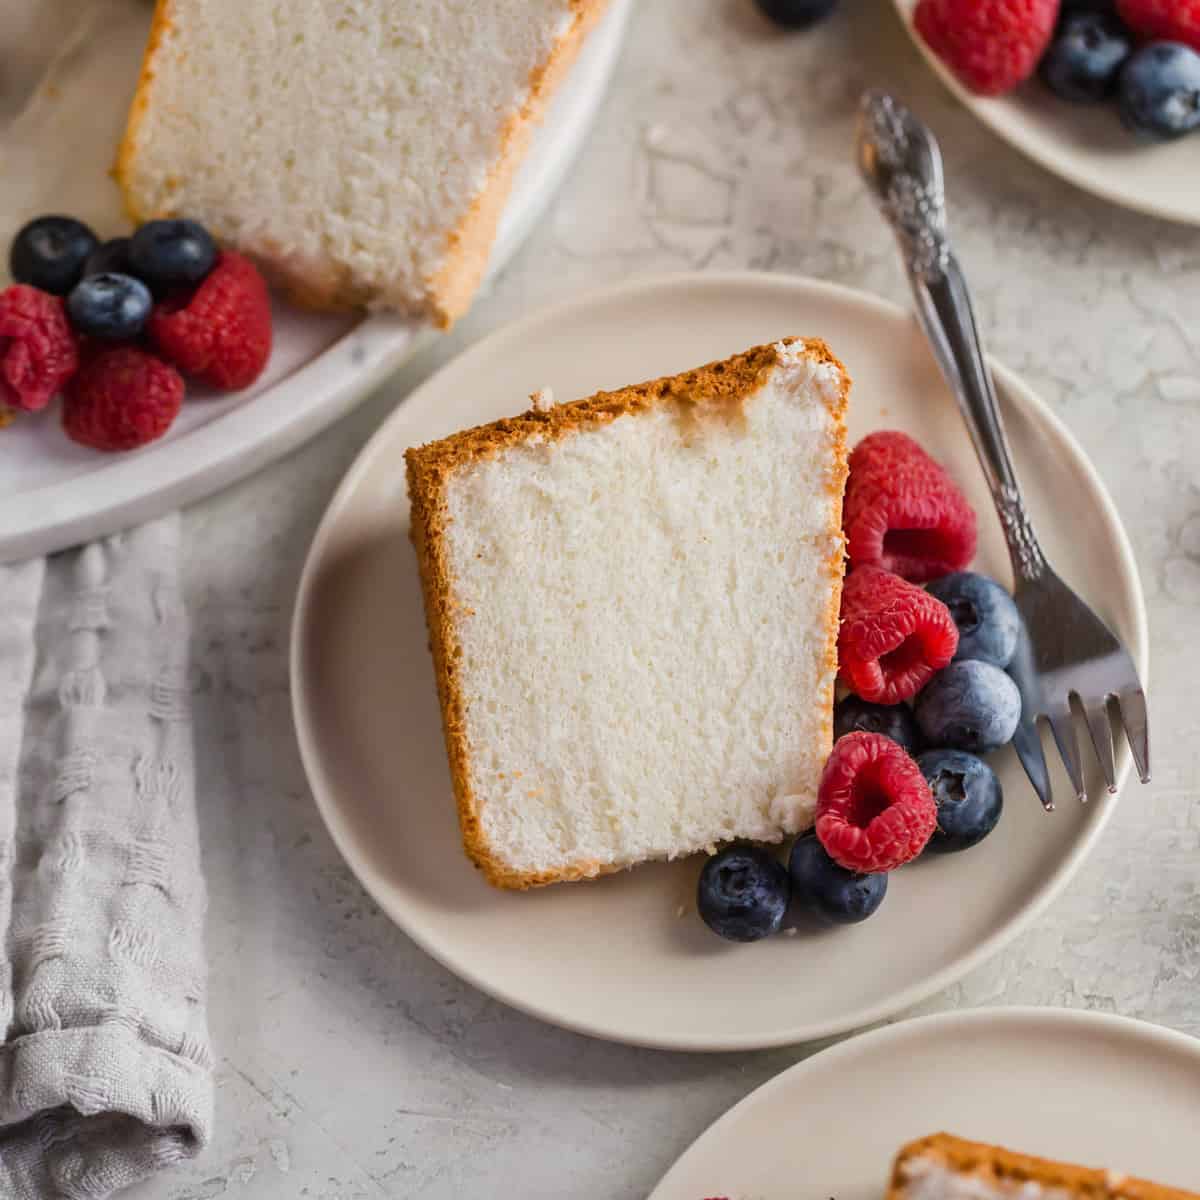 Slice of angel food cake on a plate with raspberries and blueberries.